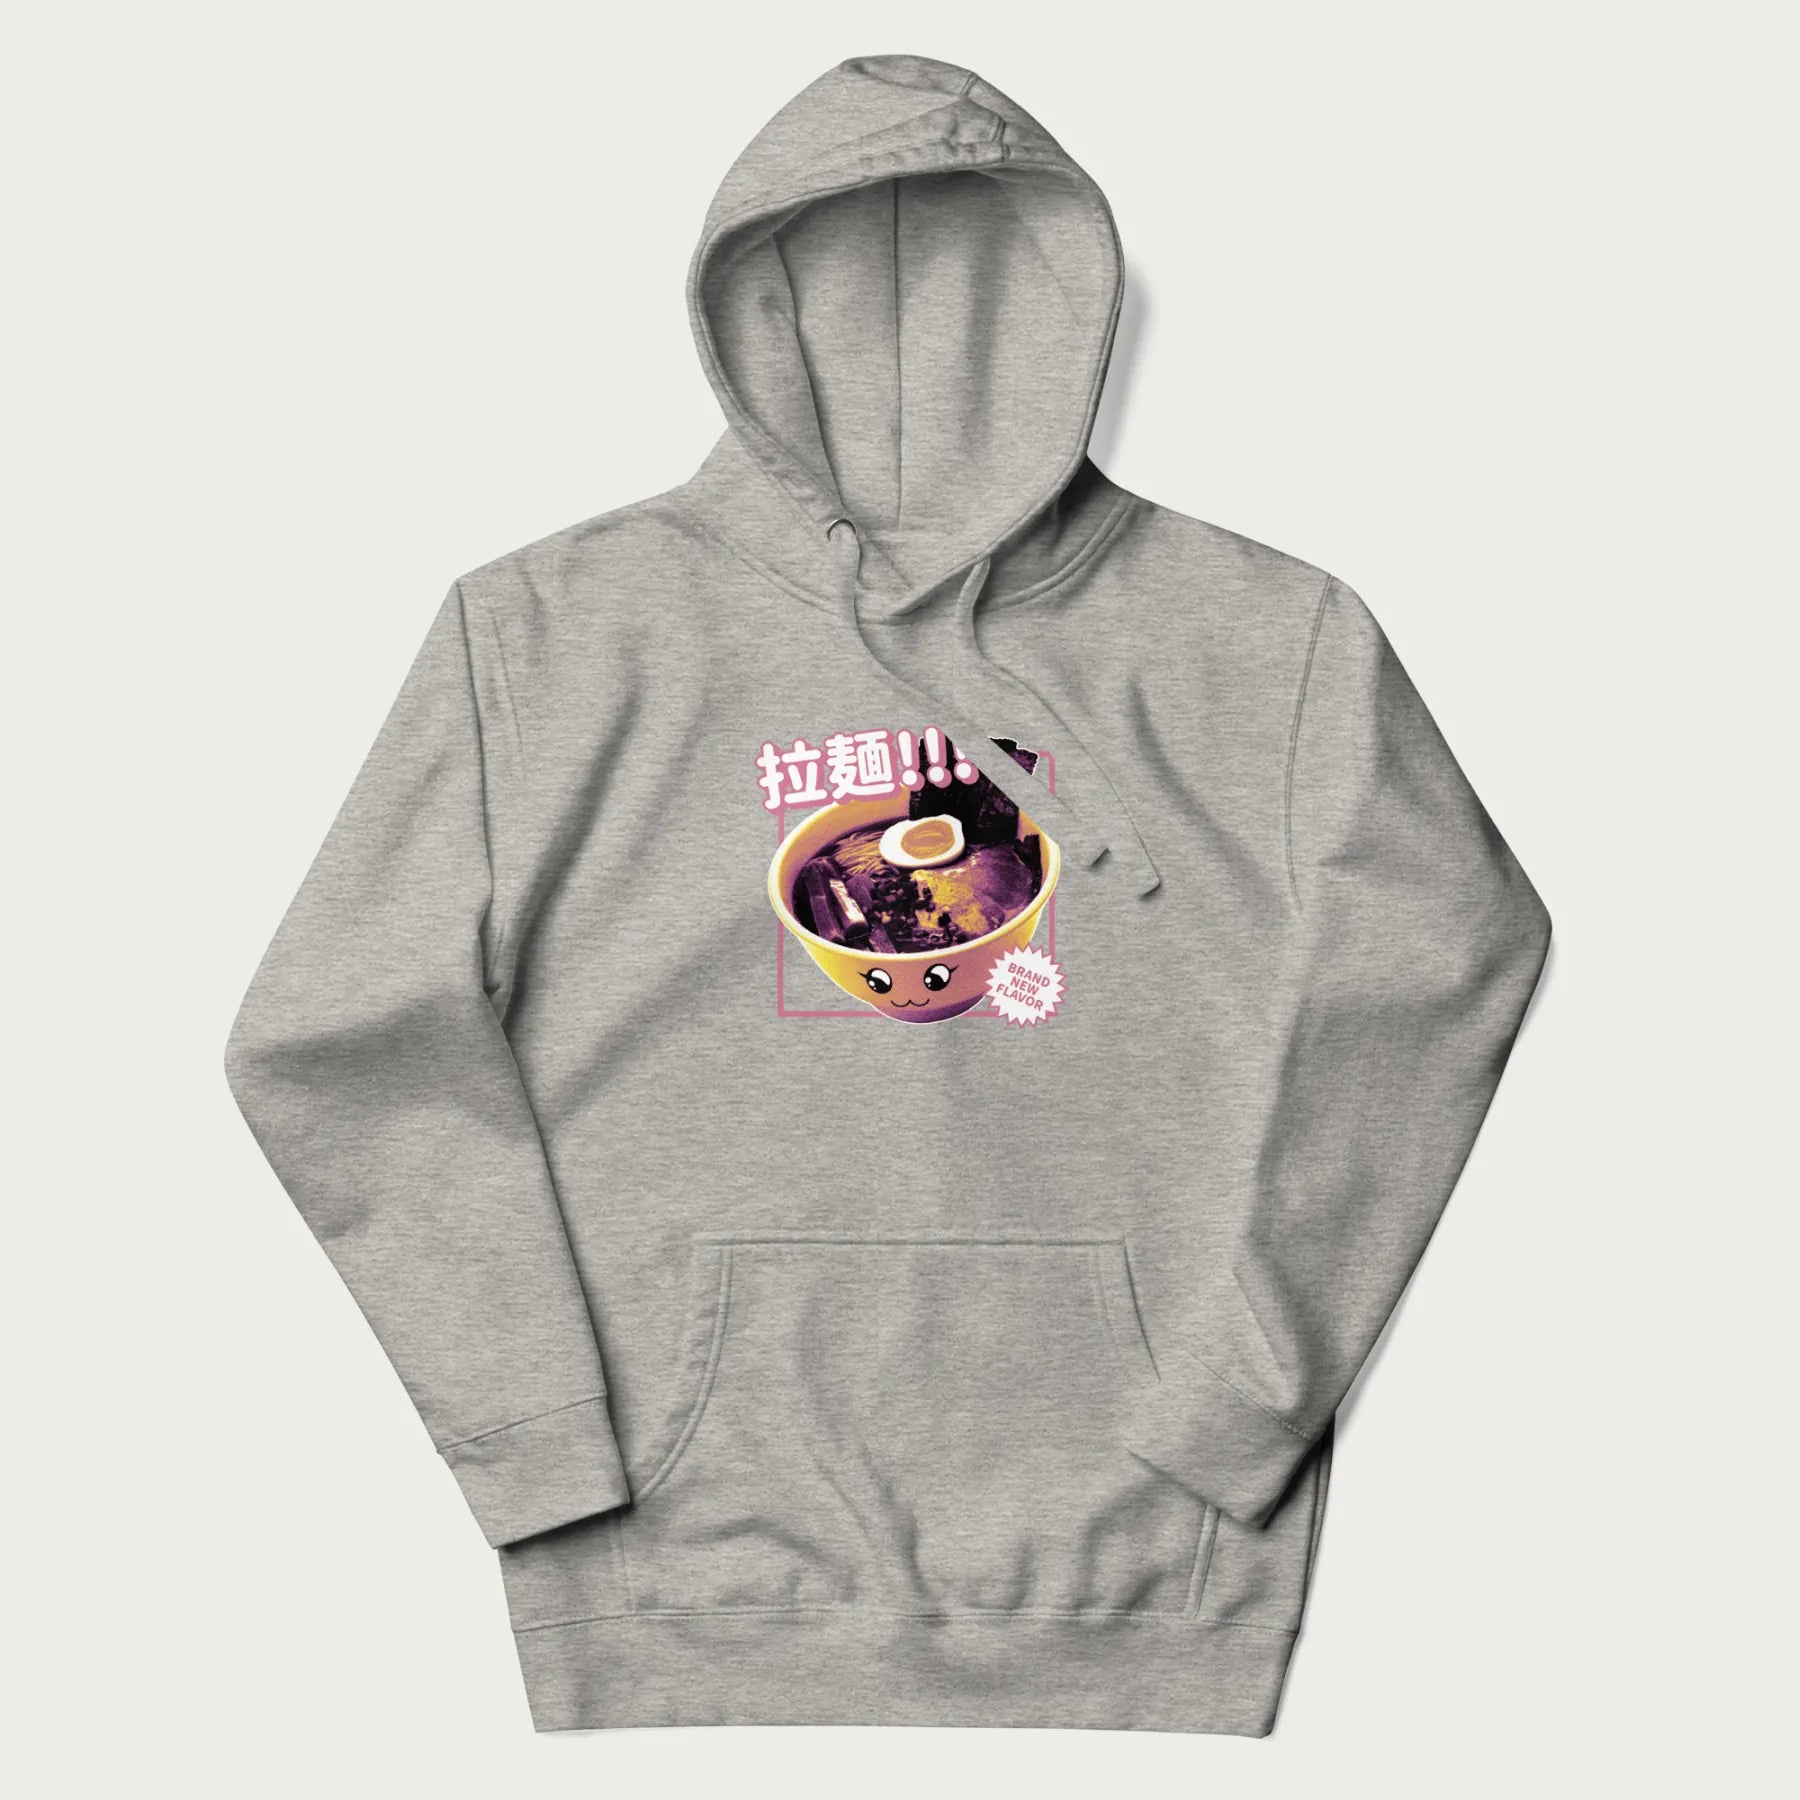 Light grey hoodie with Japanese text '拉麵!!!' (Ramen!!!) in vibrant pink and realistic ramen bowl graphic.